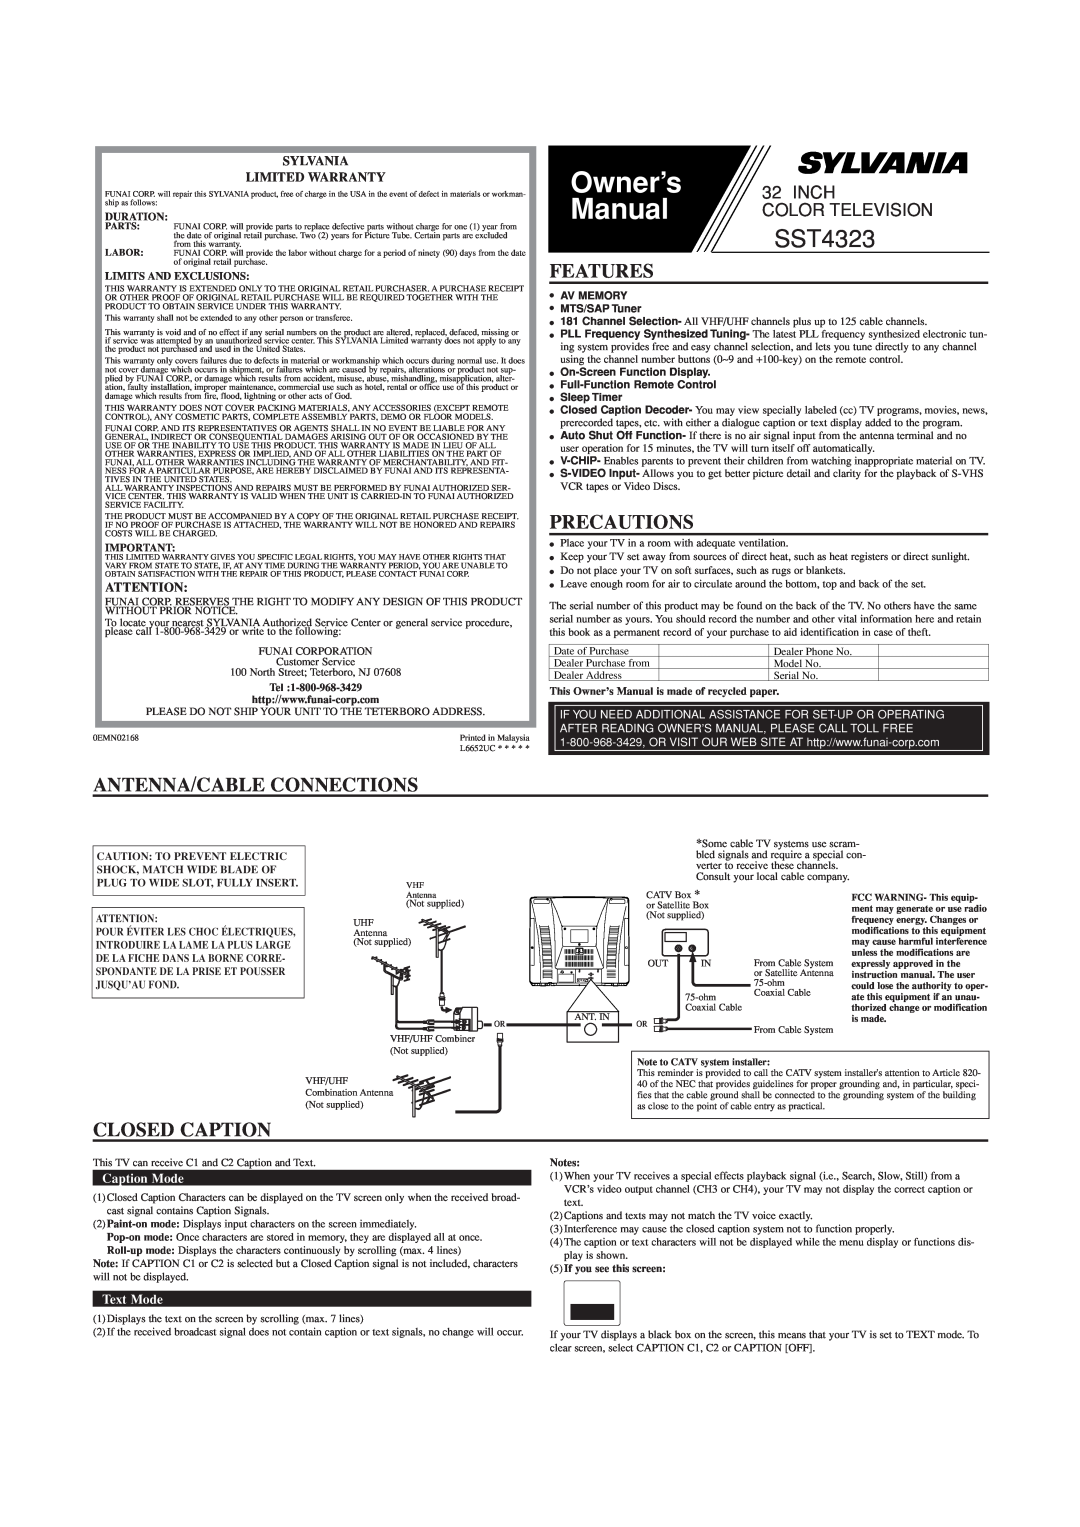 Sylvania SST4323 owner manual Features, Precautions, Antenna/Cable Connections, Closed Caption, Sylvania Limited Warranty 